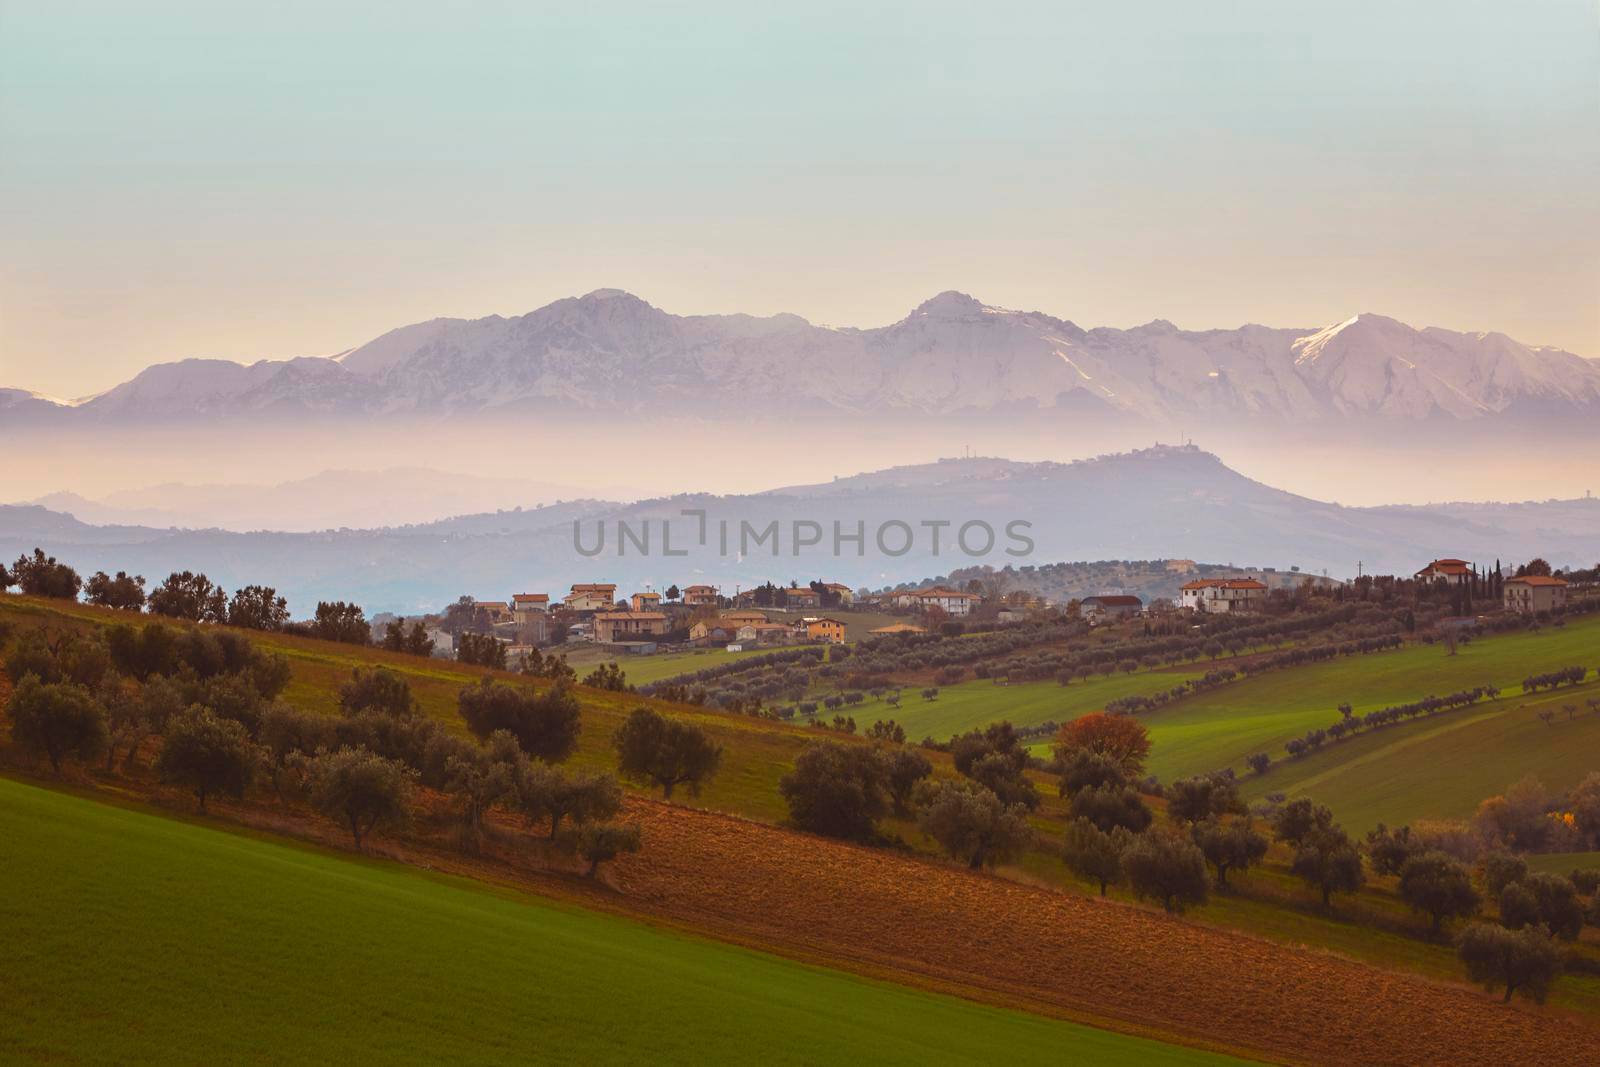 Panorama of the Italian countryside with misty and snowy mountains in distance